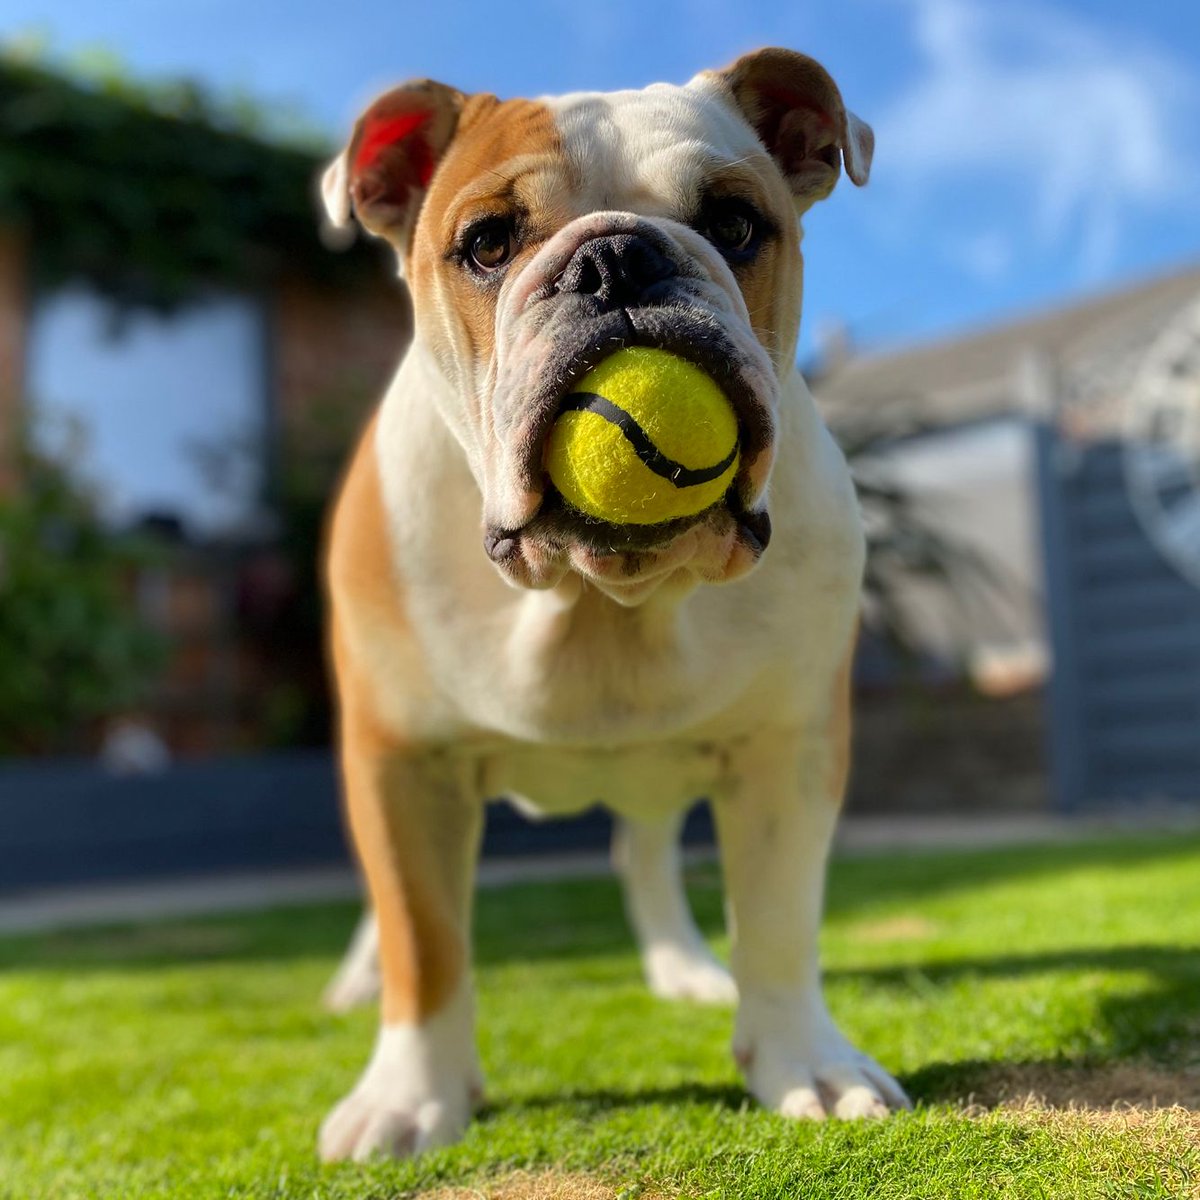 This is one of my big people’s favourite photos of me  🐶🎾 Anyone for tennis? … Happy #ThrowbackThursday y’all 🐶🐾❤️ Barney #BarneyTheBulldog #DogsOfTwitter #DogsOfX #DogsOfIG #DogsOfFacebook #Bulldog #EnglishBulldog #TBT #Thursday #Puppy